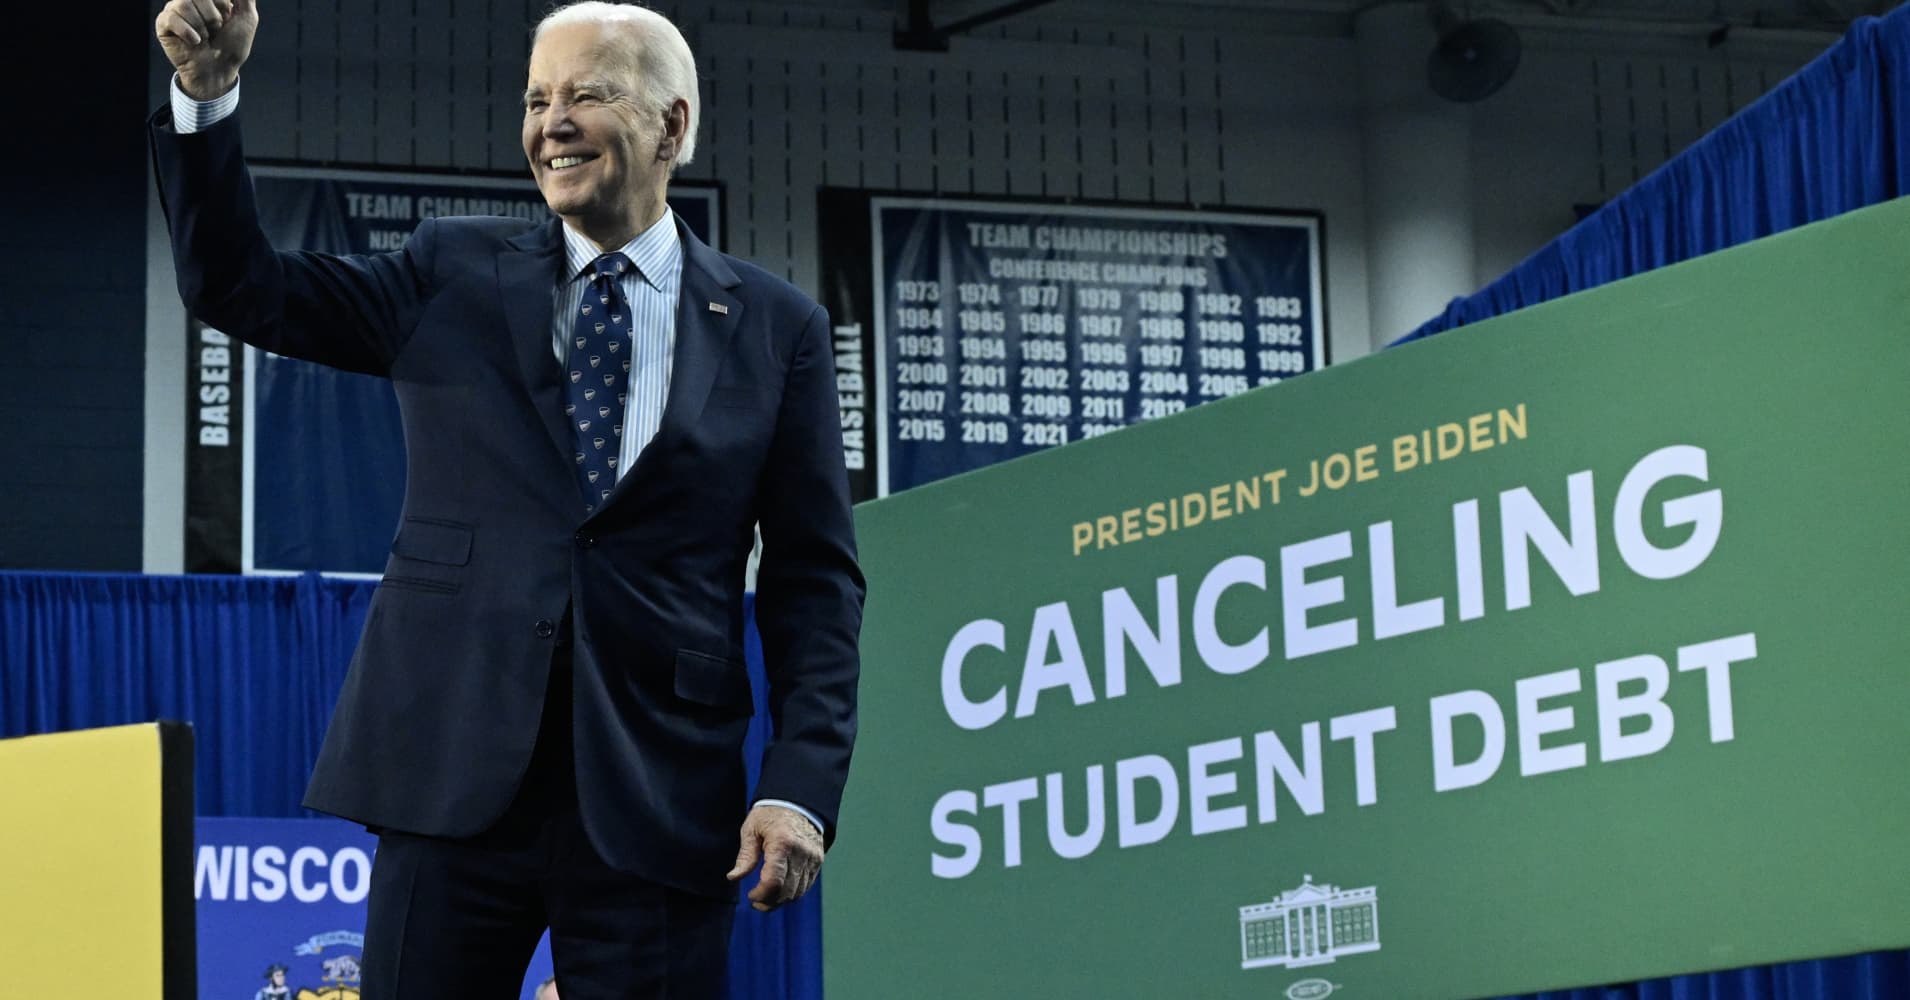 biden's student loan forgiveness plan gets a record number of public comments. here's what people are saying